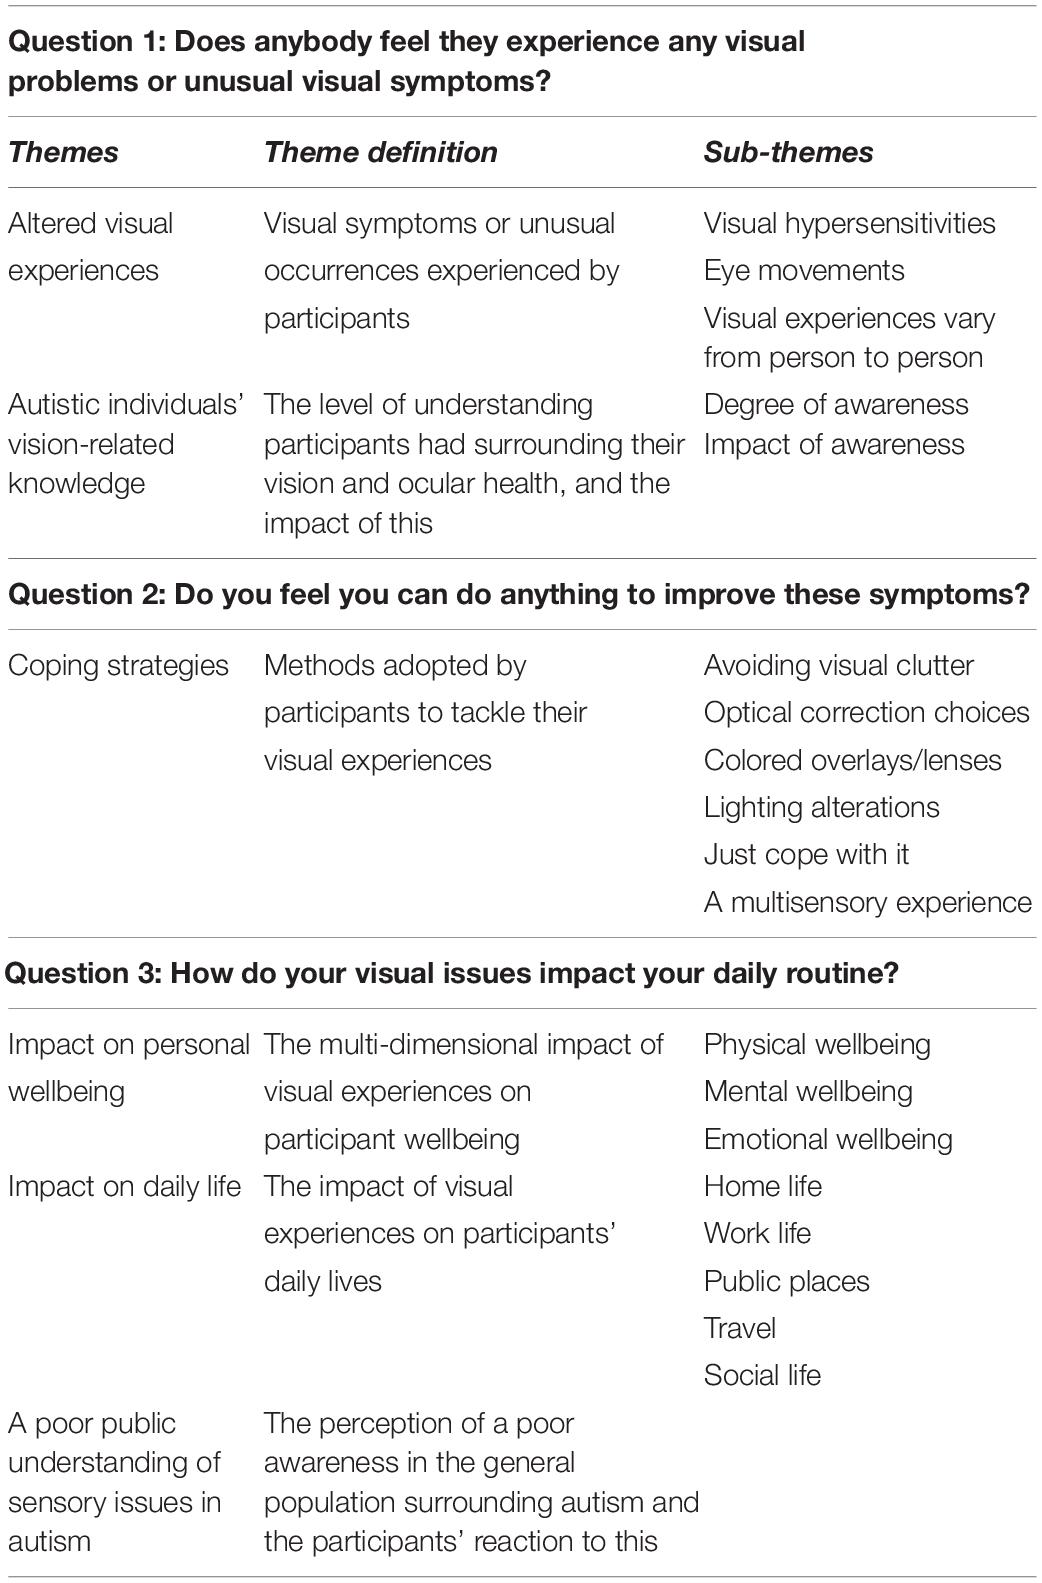 Frontiers | Visual Sensory Experiences From the Viewpoint of Adults